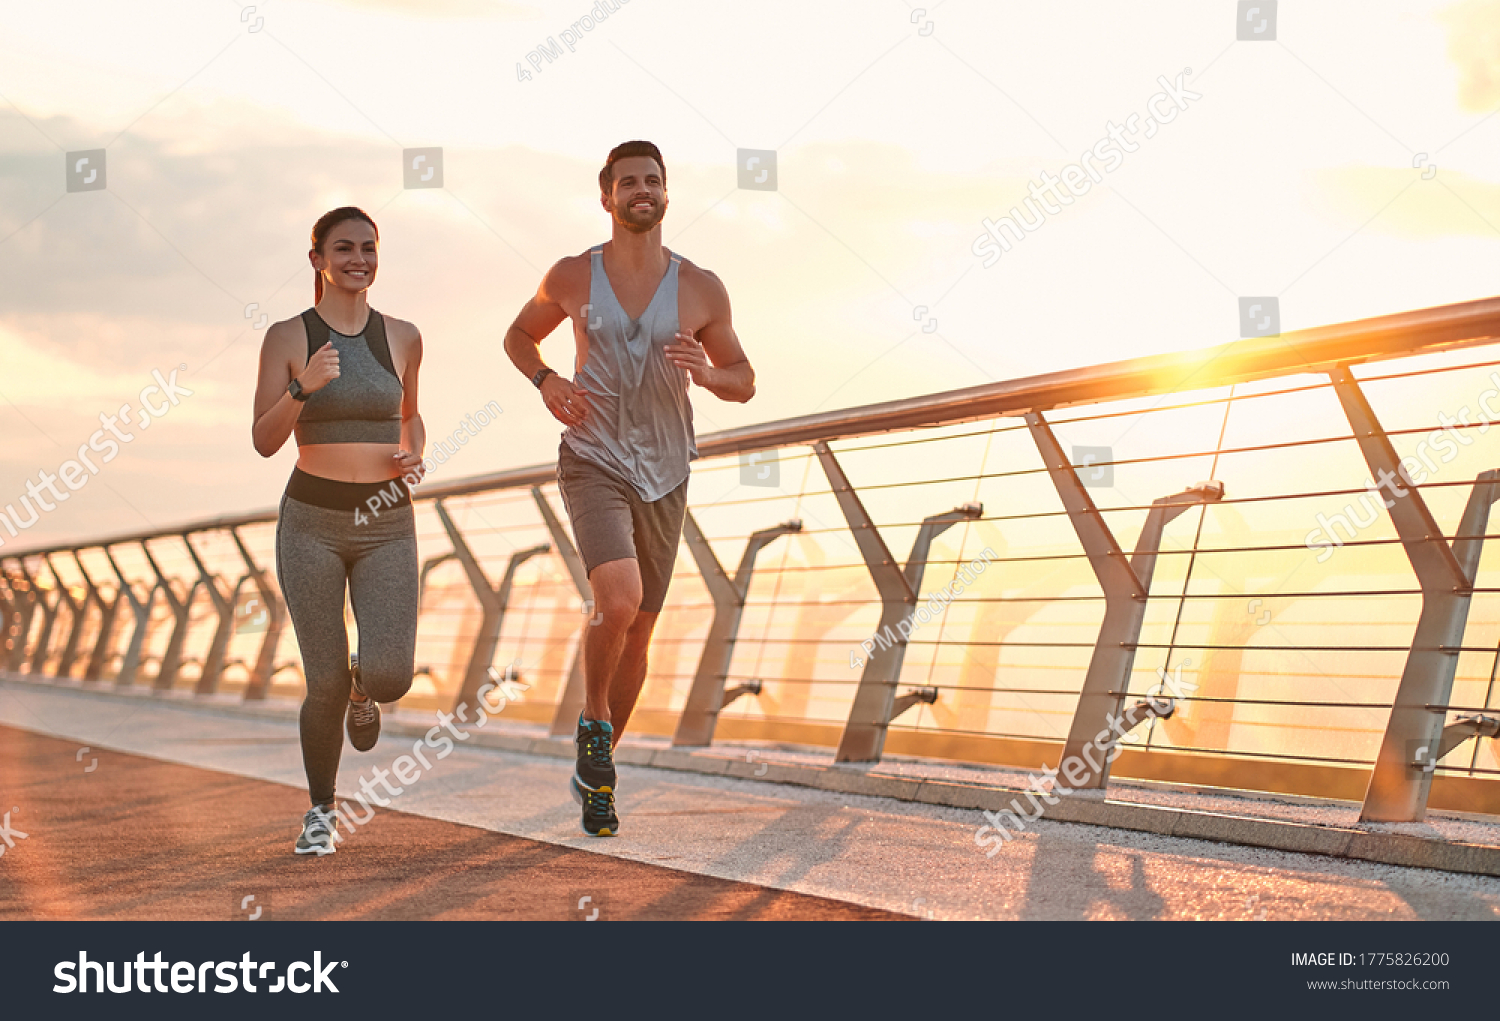 Couple doing sport together on the street. Morning run #1775826200